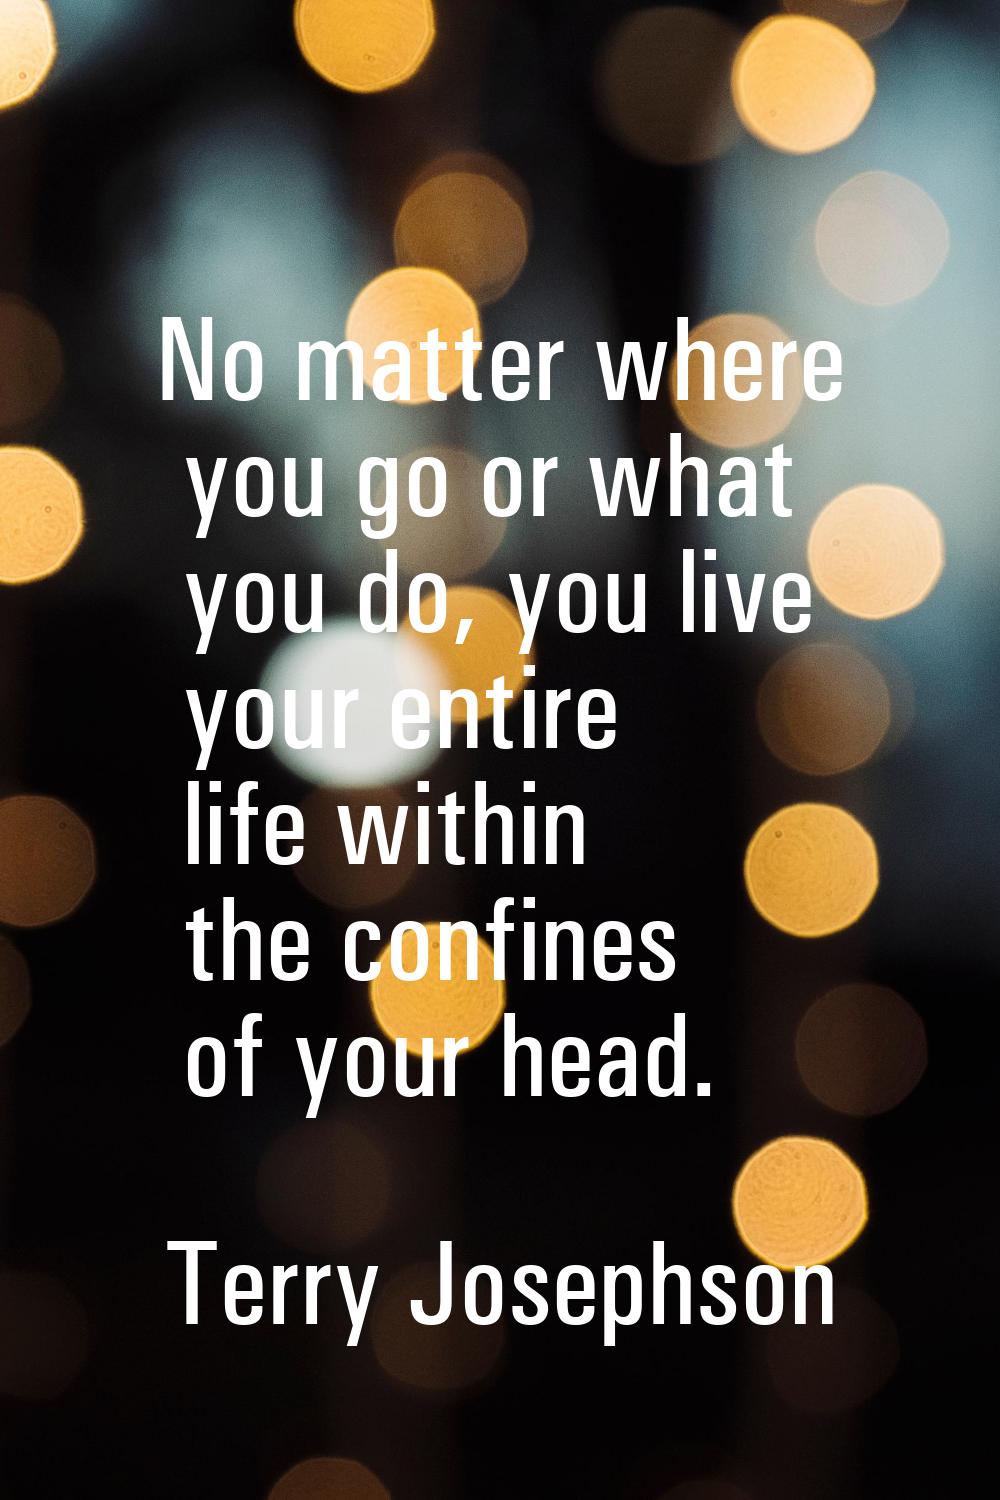 No matter where you go or what you do, you live your entire life within the confines of your head.